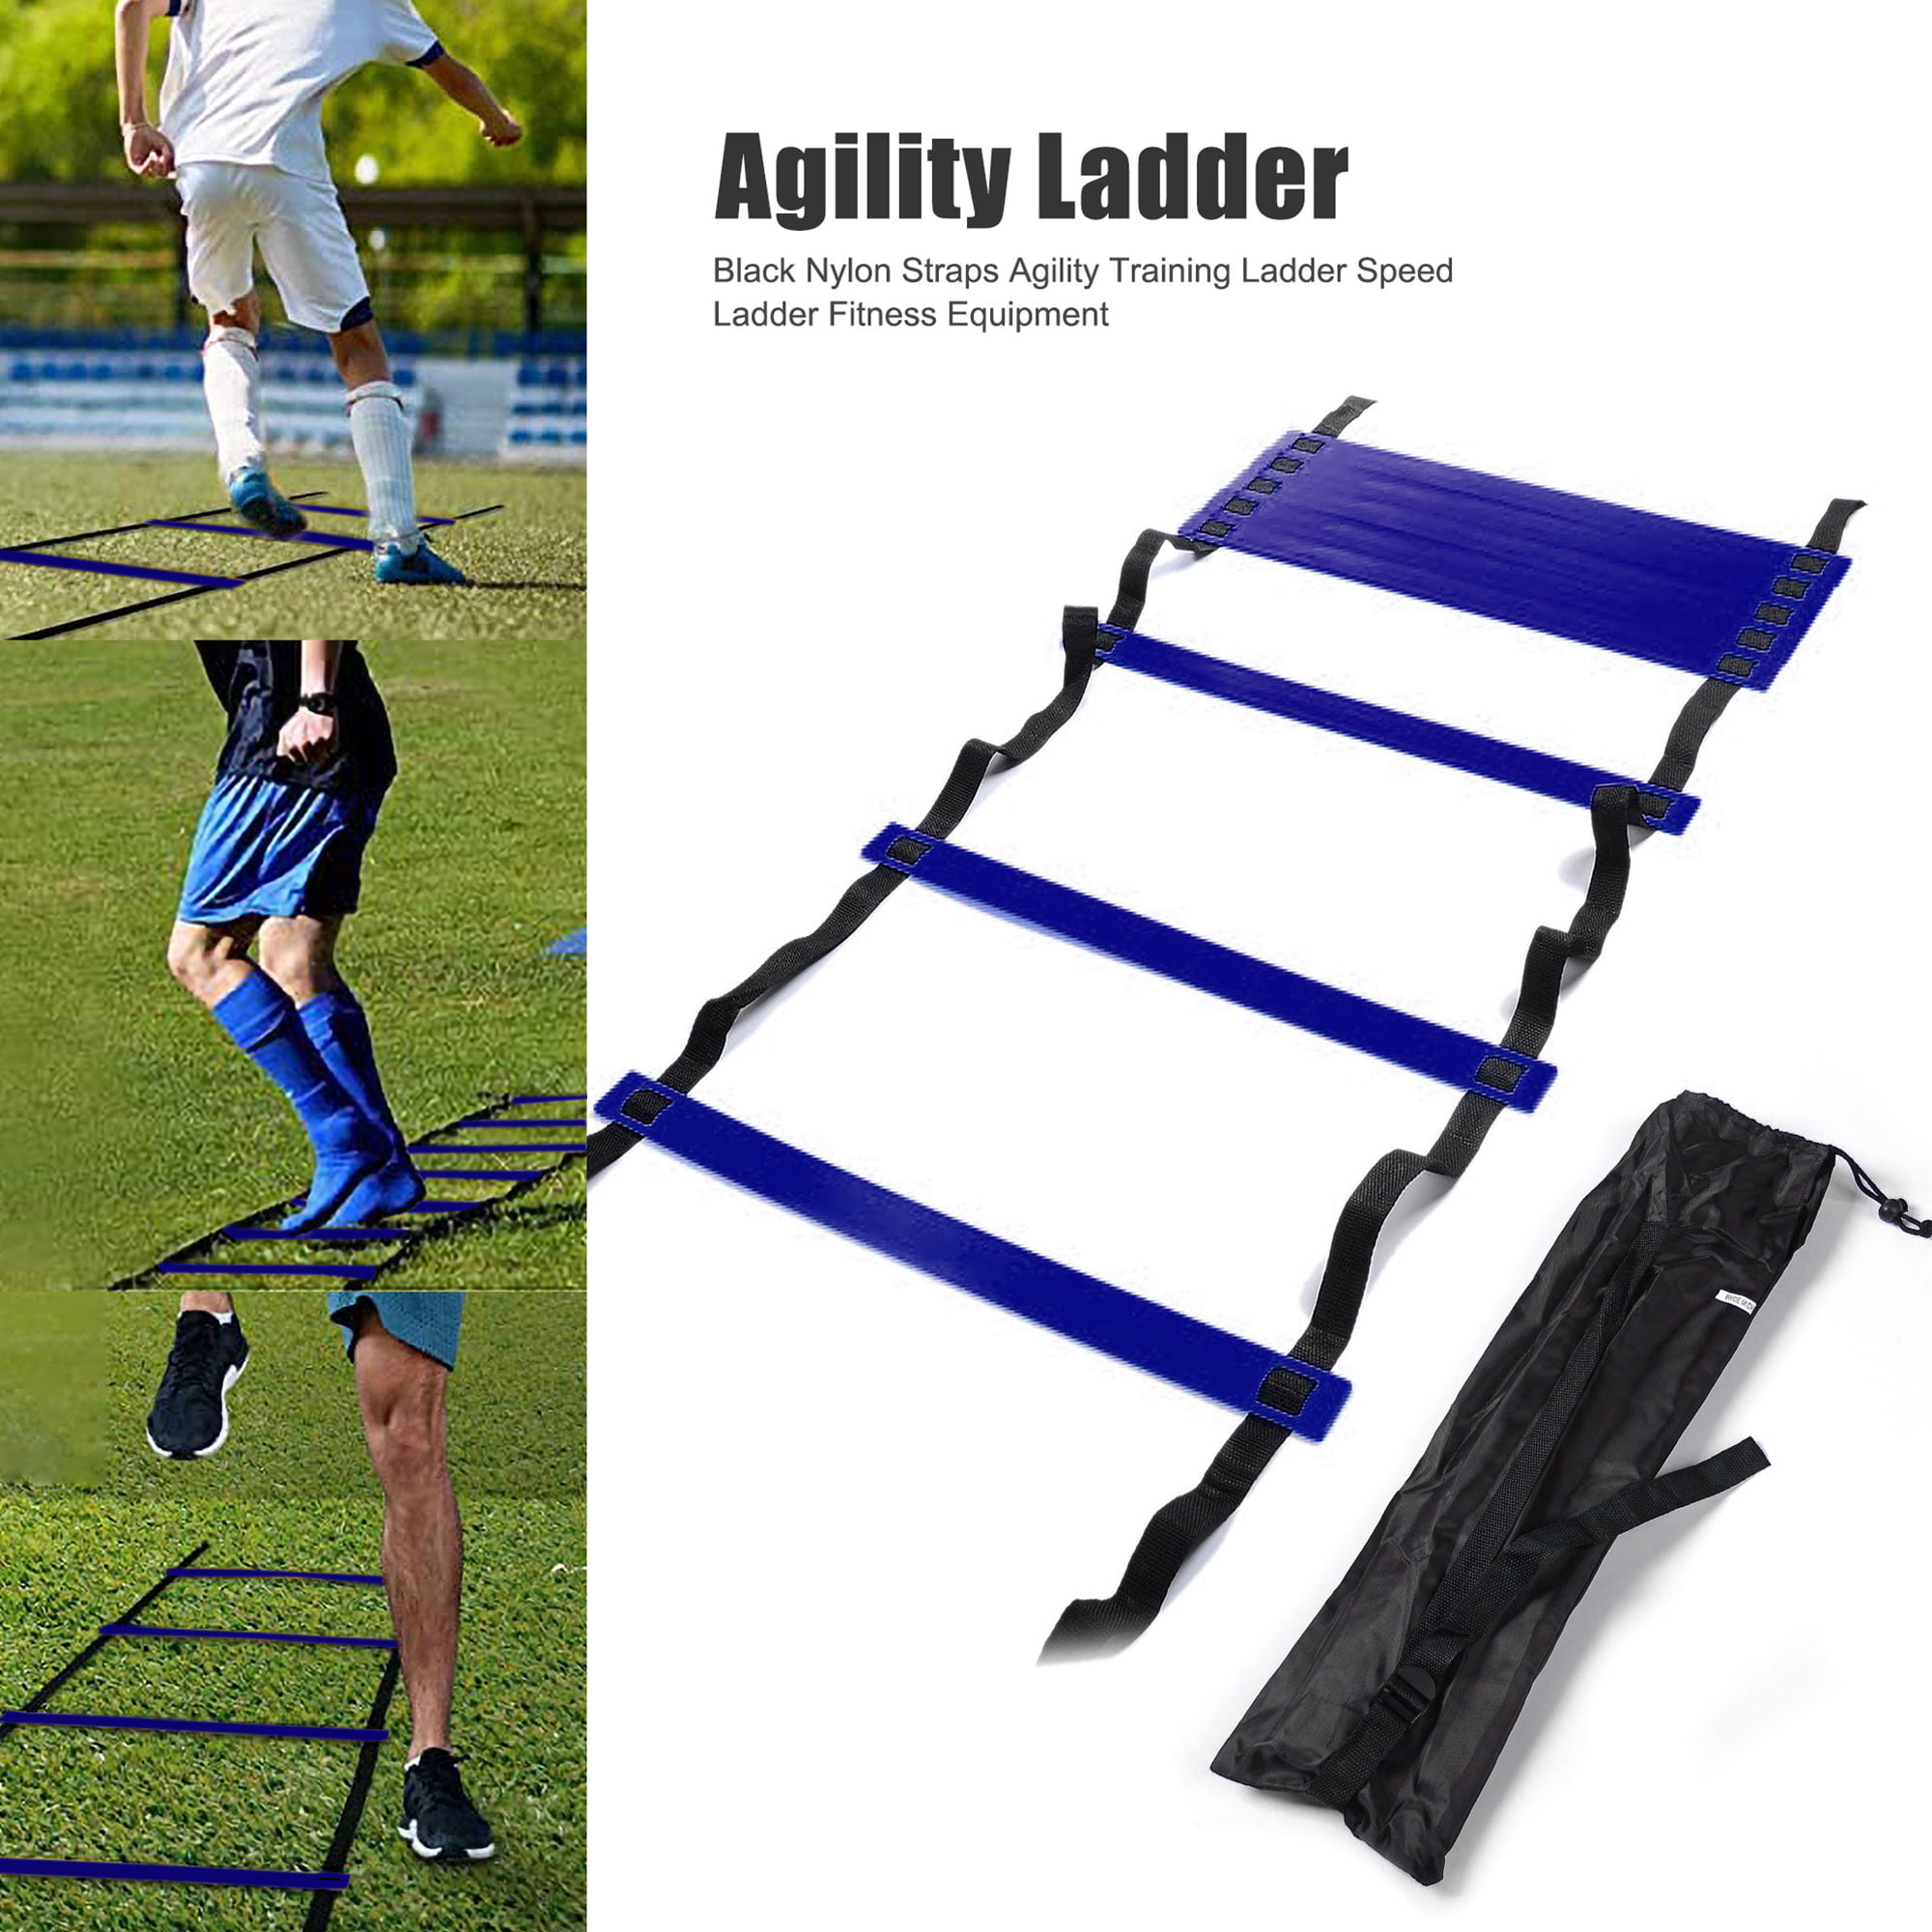 8 Rung Speed Training Ladder AgilityFootwork Football Exercise Workout 